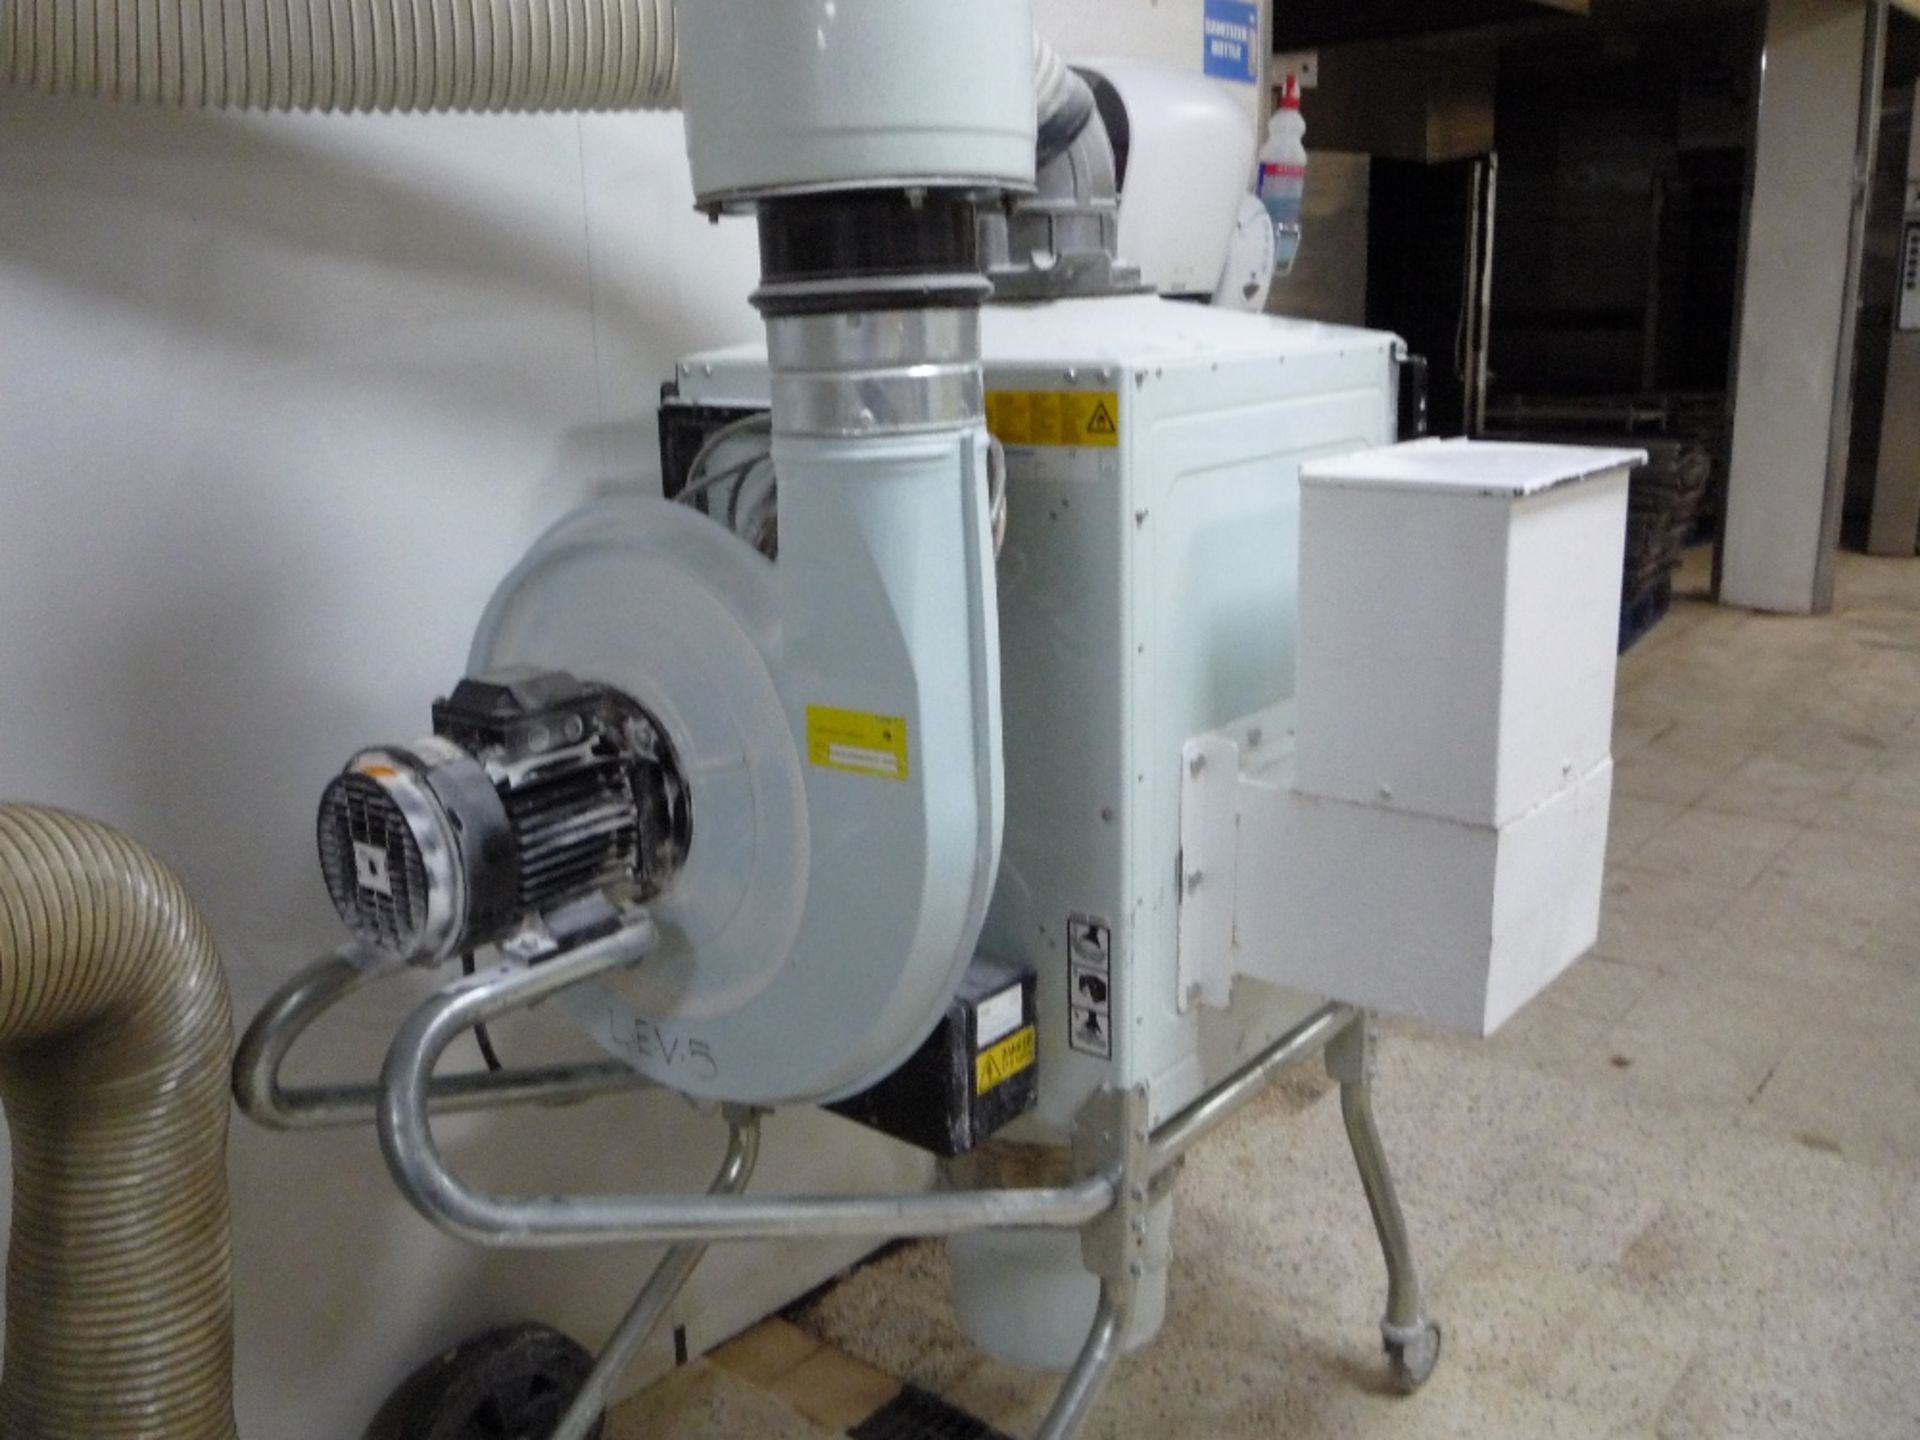 Nederman Mobile Dust Extraction Unit, Serial No: 663